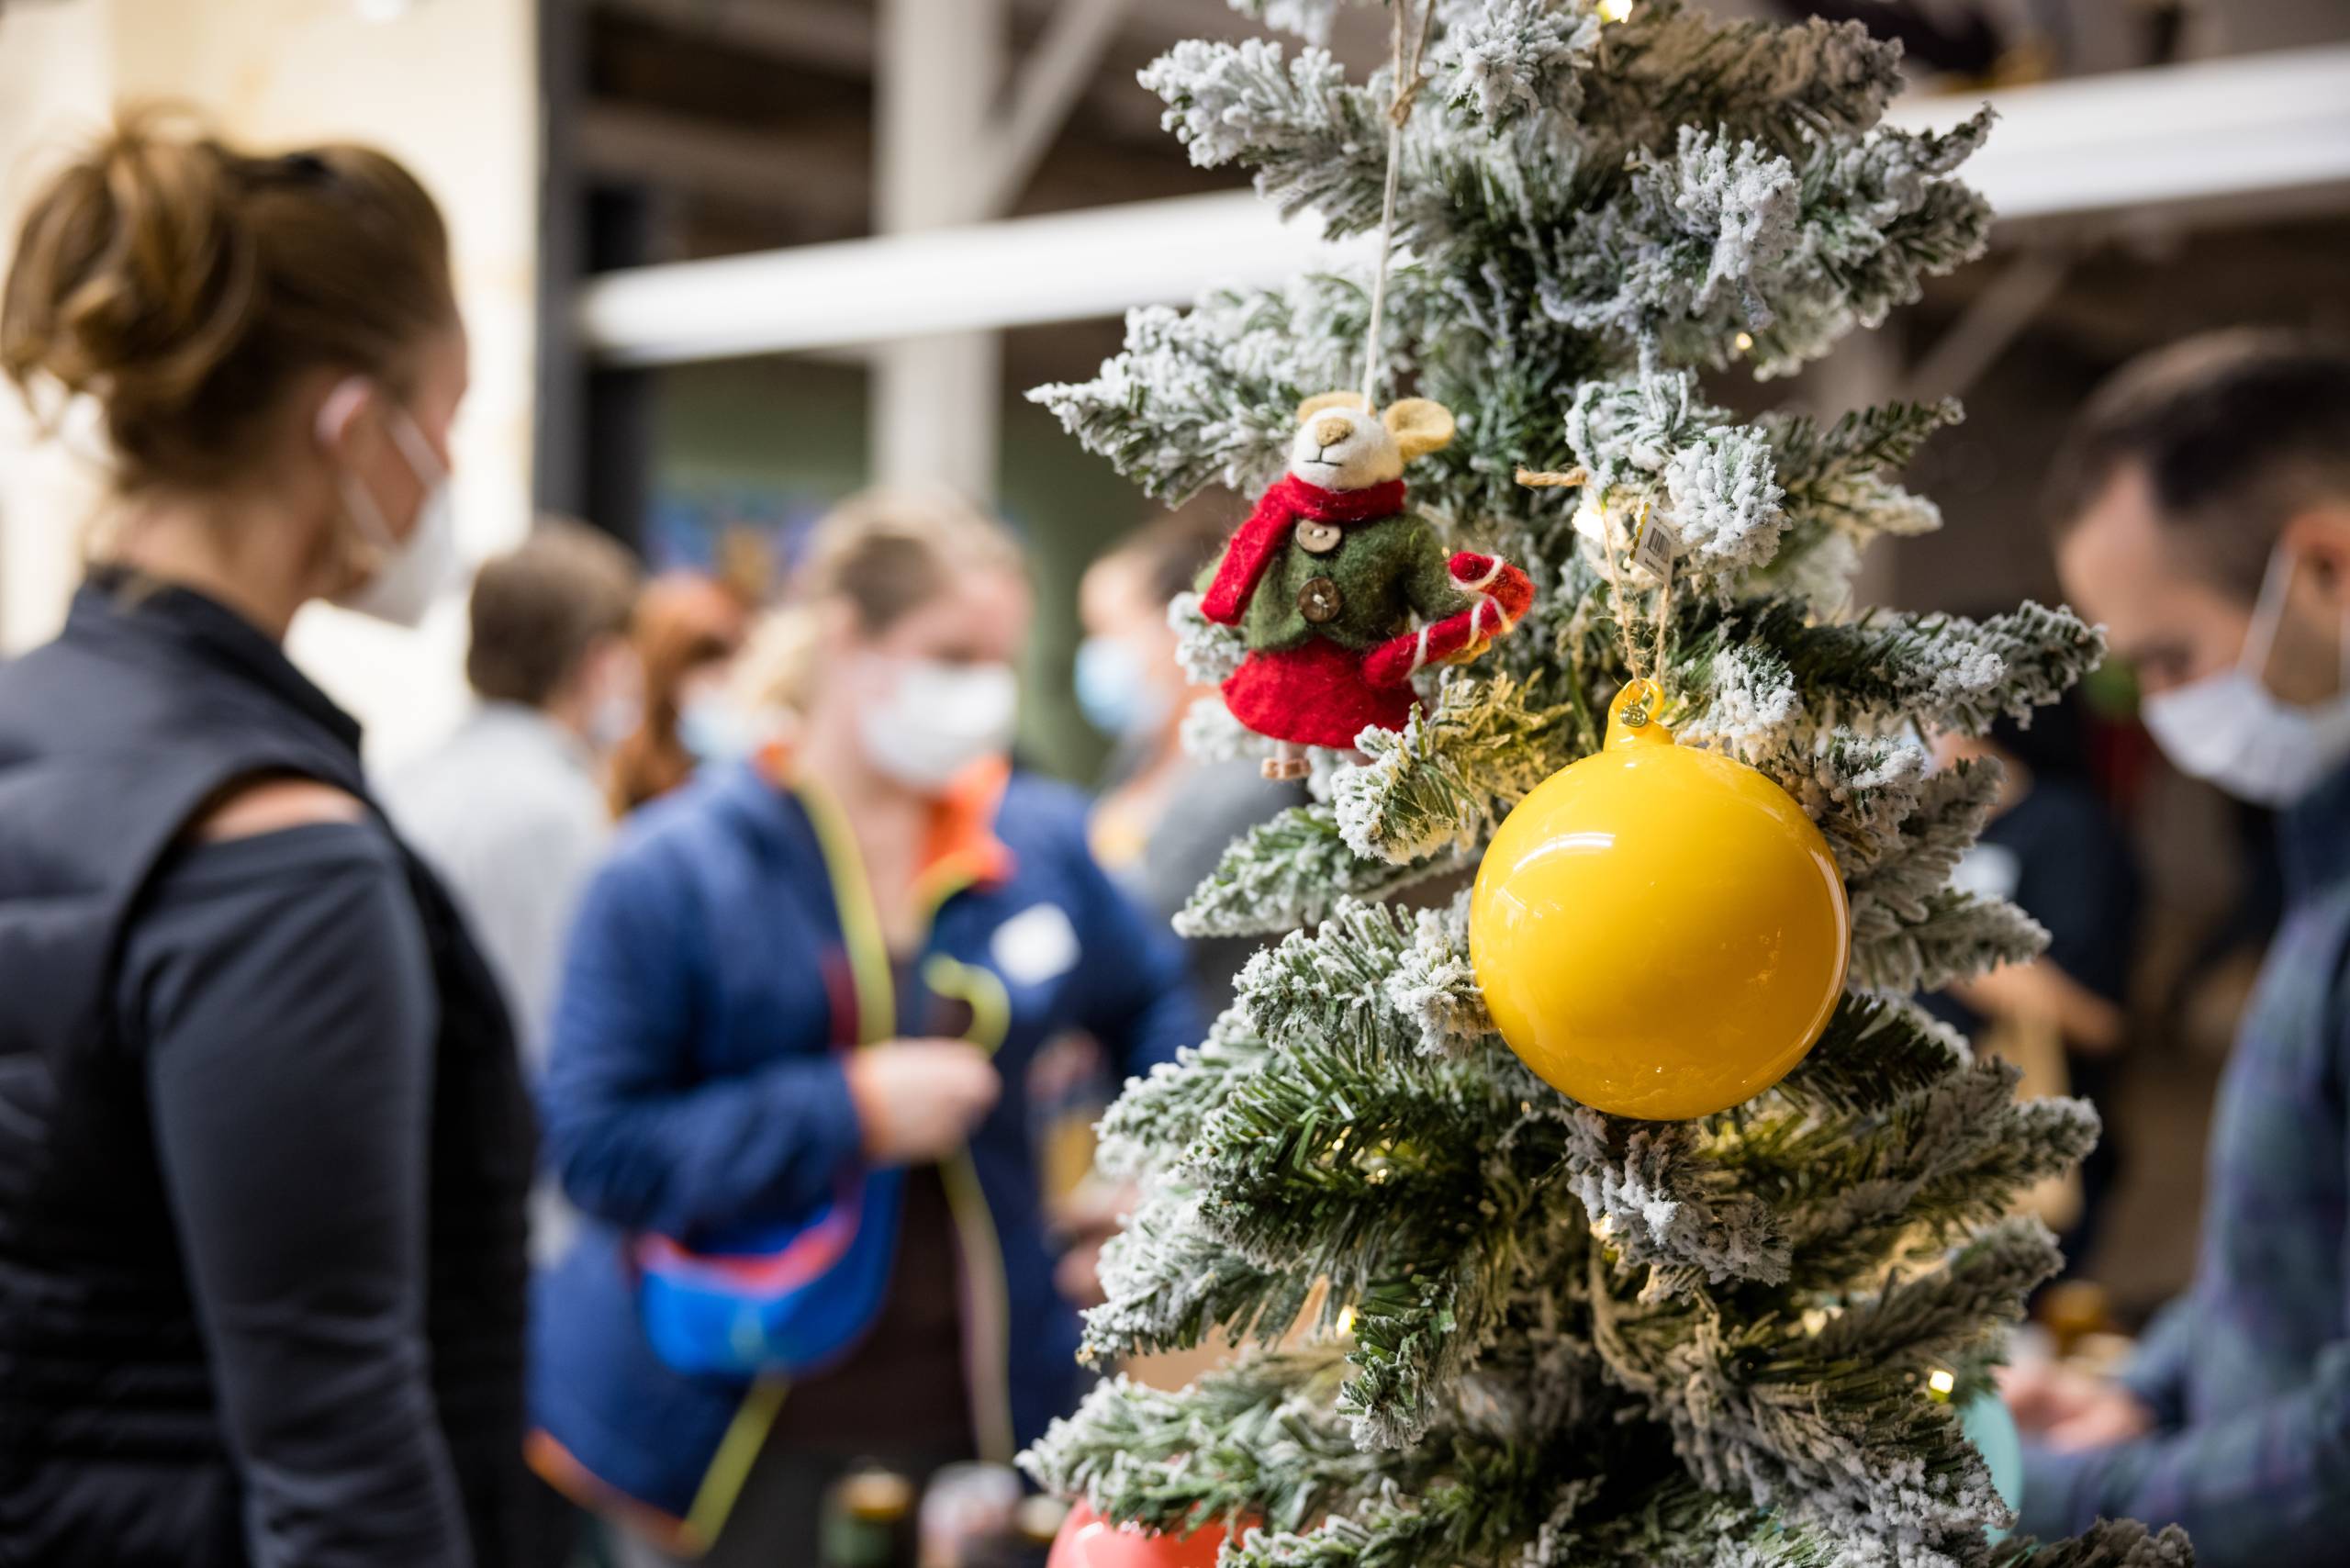 a christmas tree decorated with a yellow ball and a mouse ornament foregrounds people mingling in the background